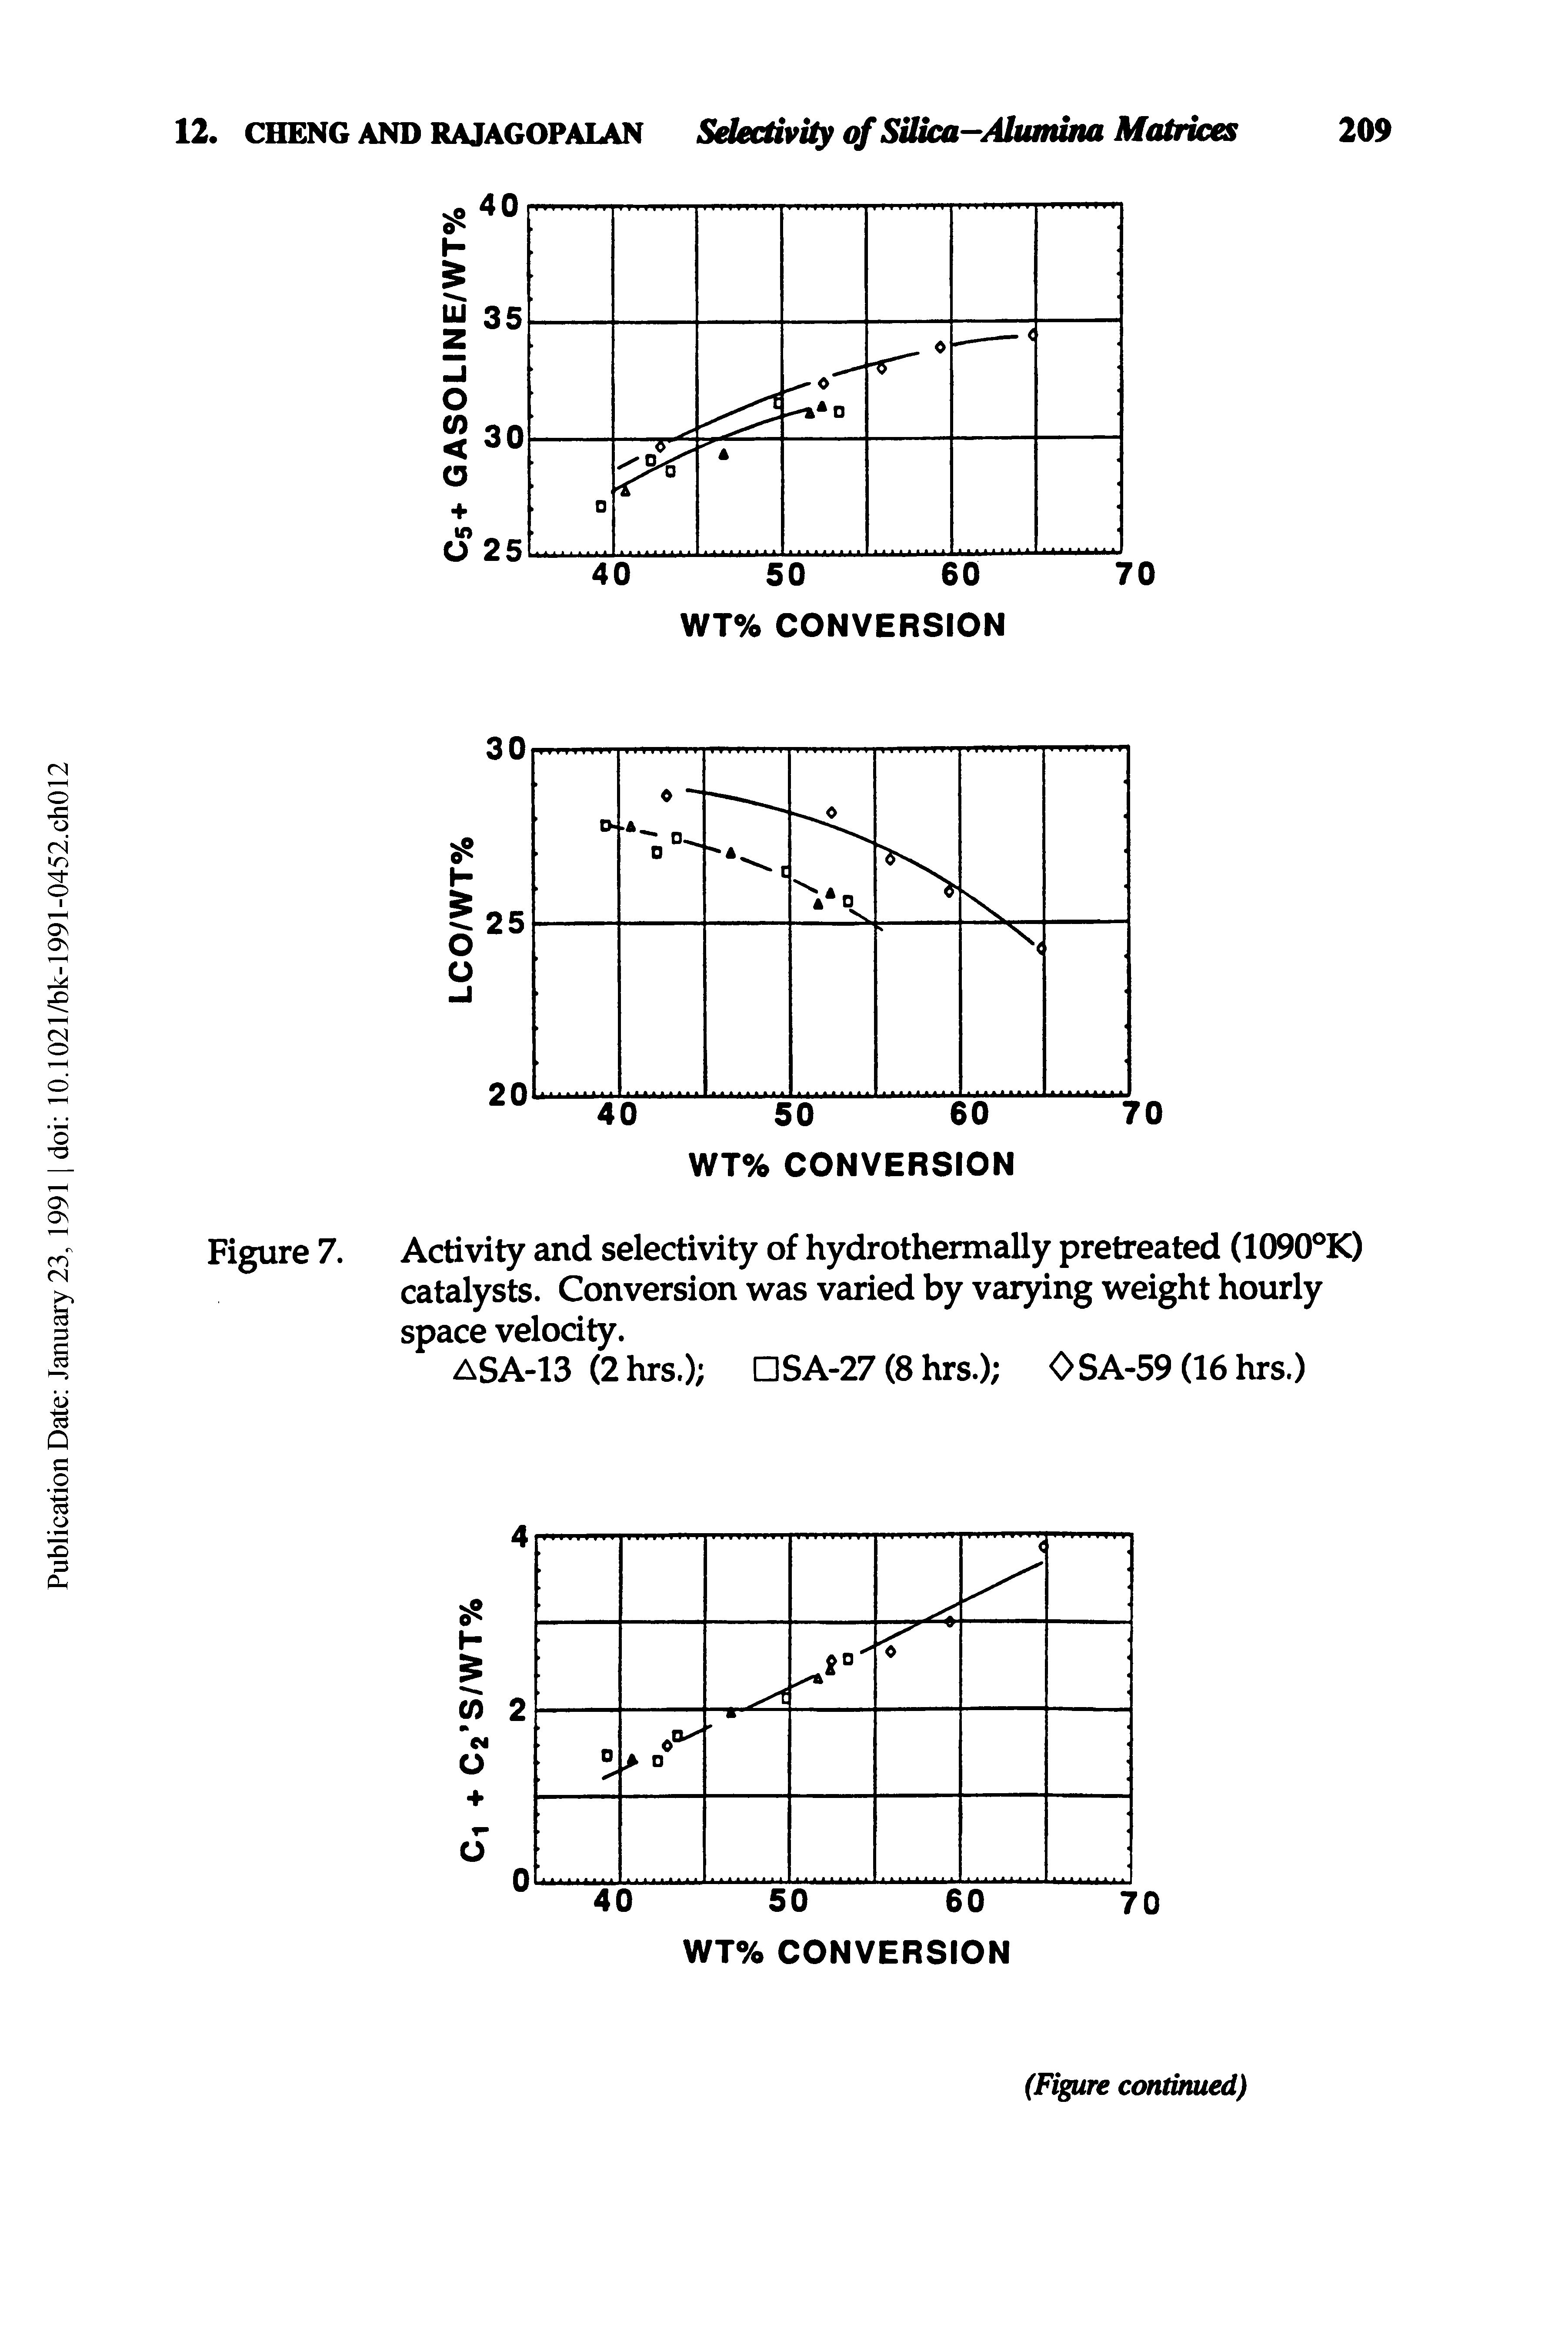 Figure 7. Activity and selectivity of hydrothermally pretreated (1090°K) catalysts. Conversion was varied by varying weight hourly space velocity.